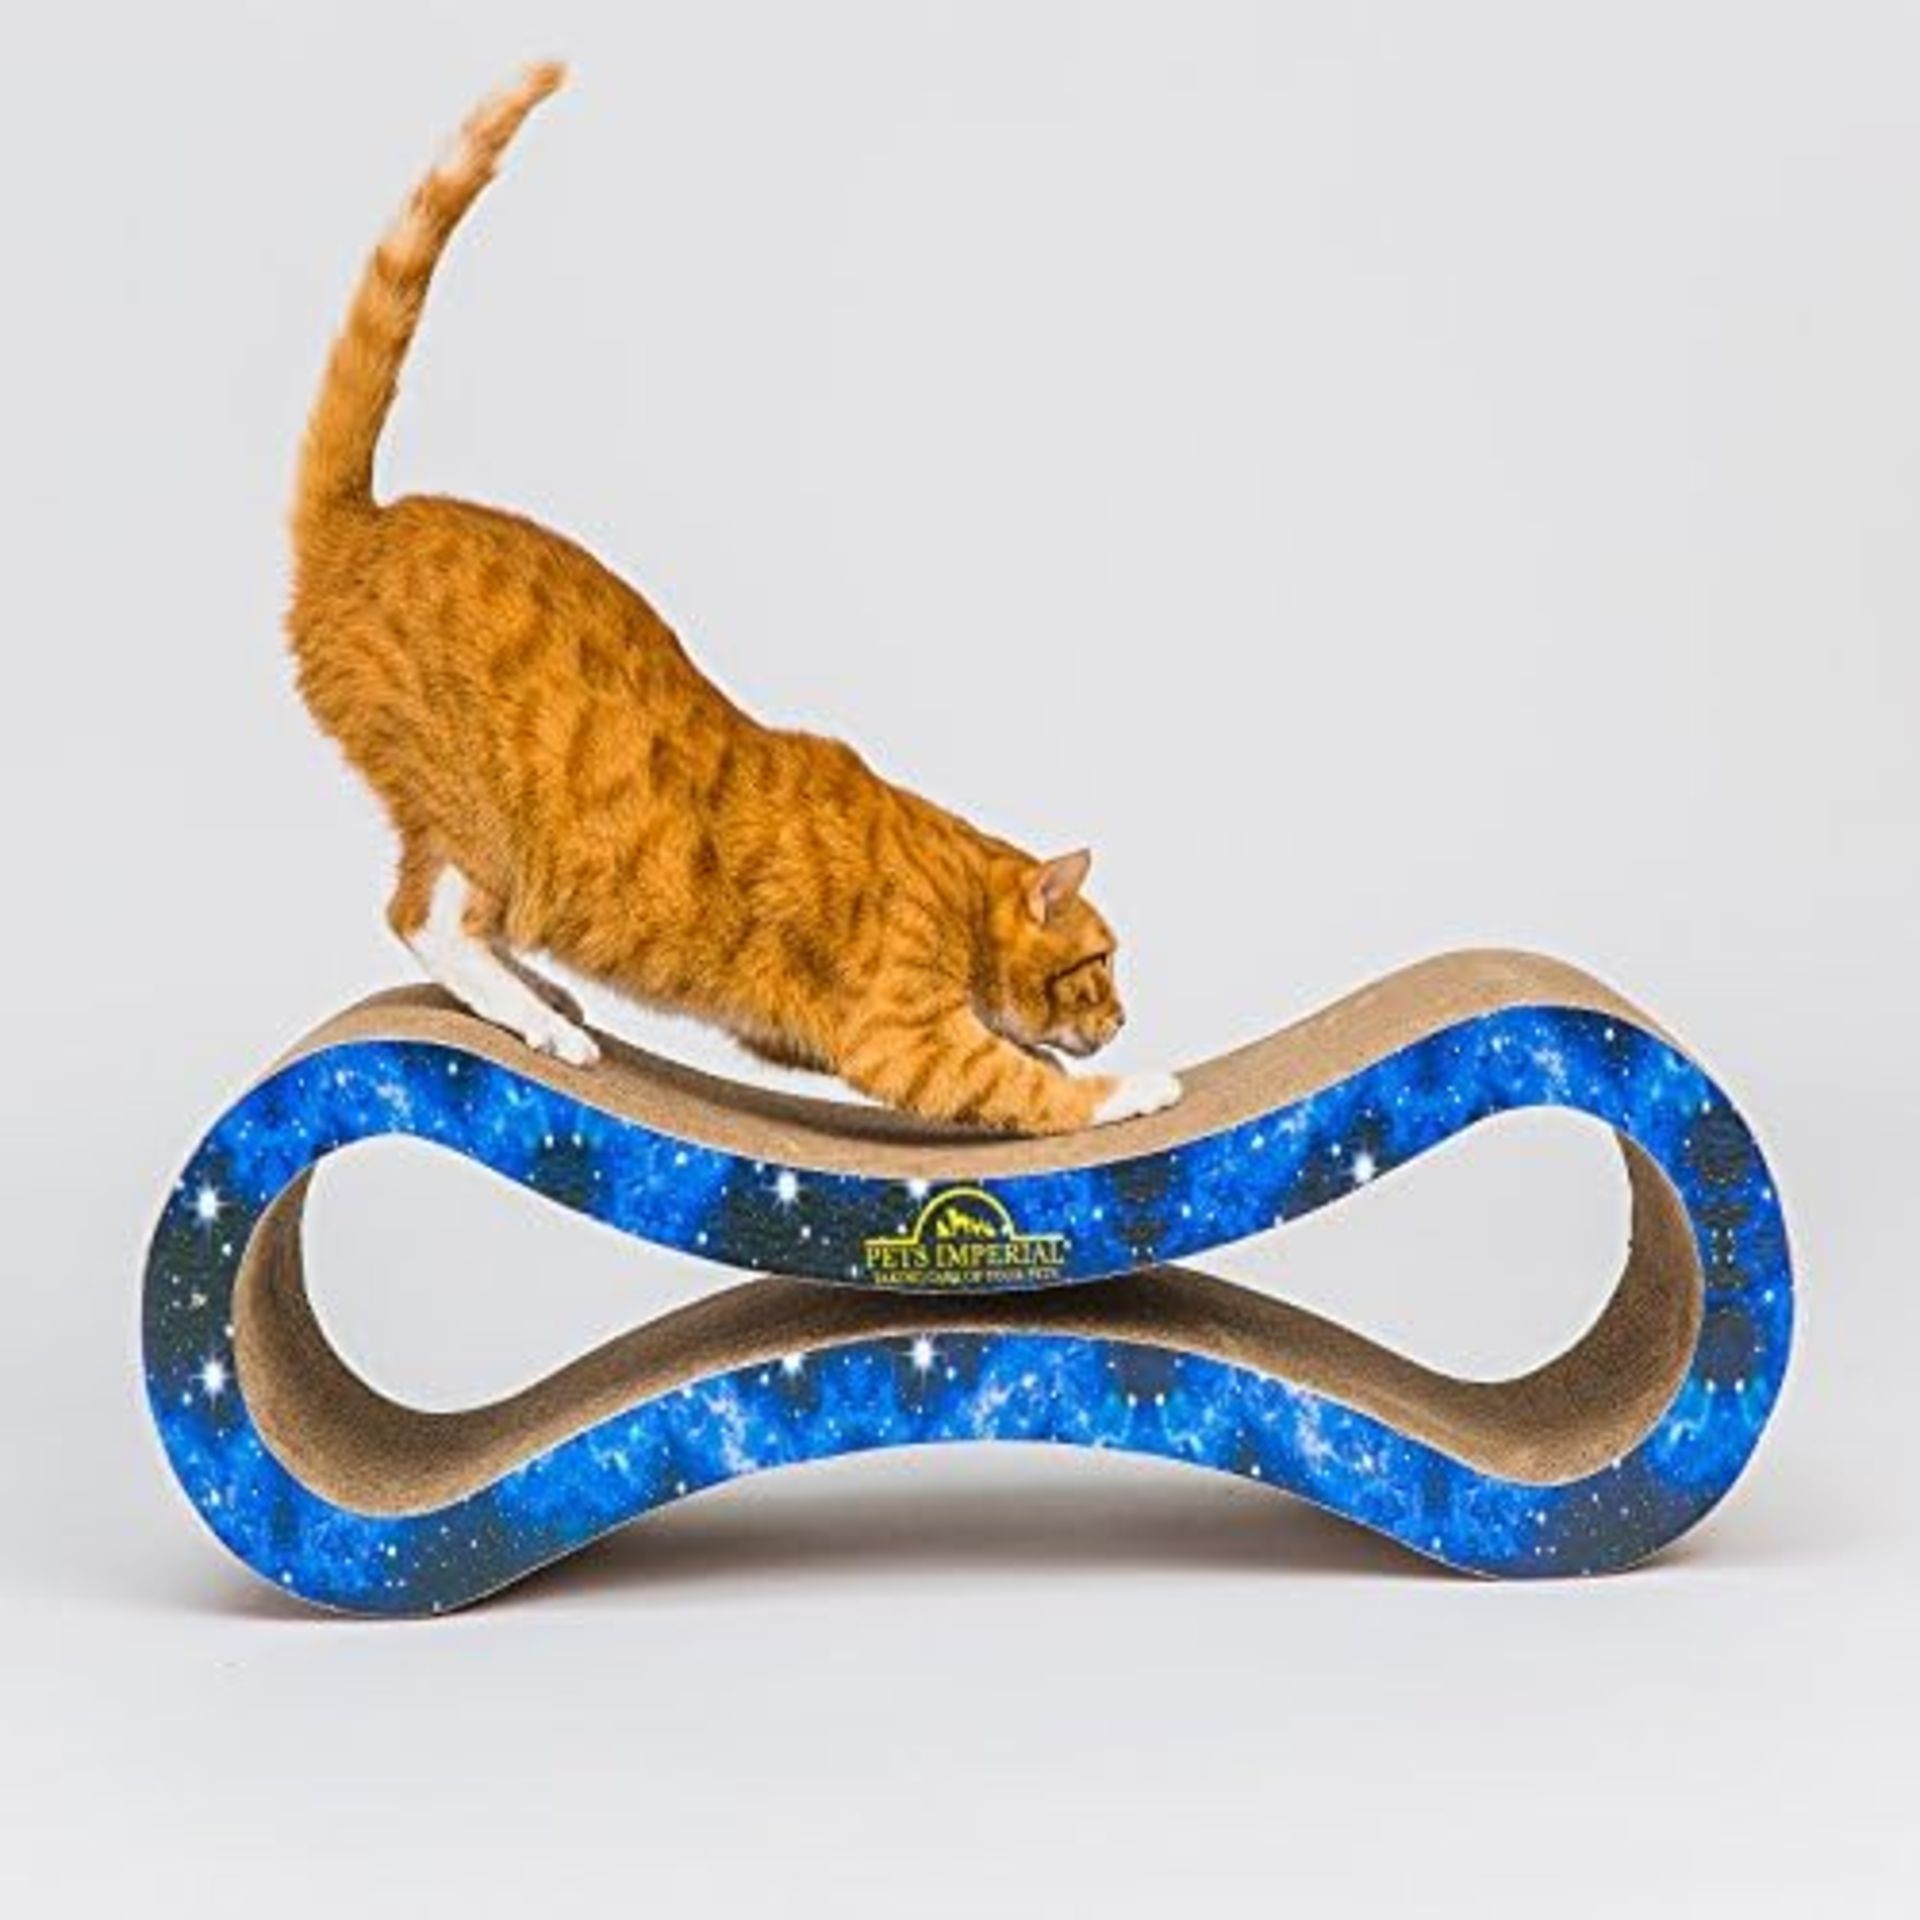 2x BRAND NEW PETS IMPERIAL EMPEROR CAT SCRATCHER LOUNGE WITH BLUE STARRY COLOR PAPER. (S1RA) - Image 2 of 2